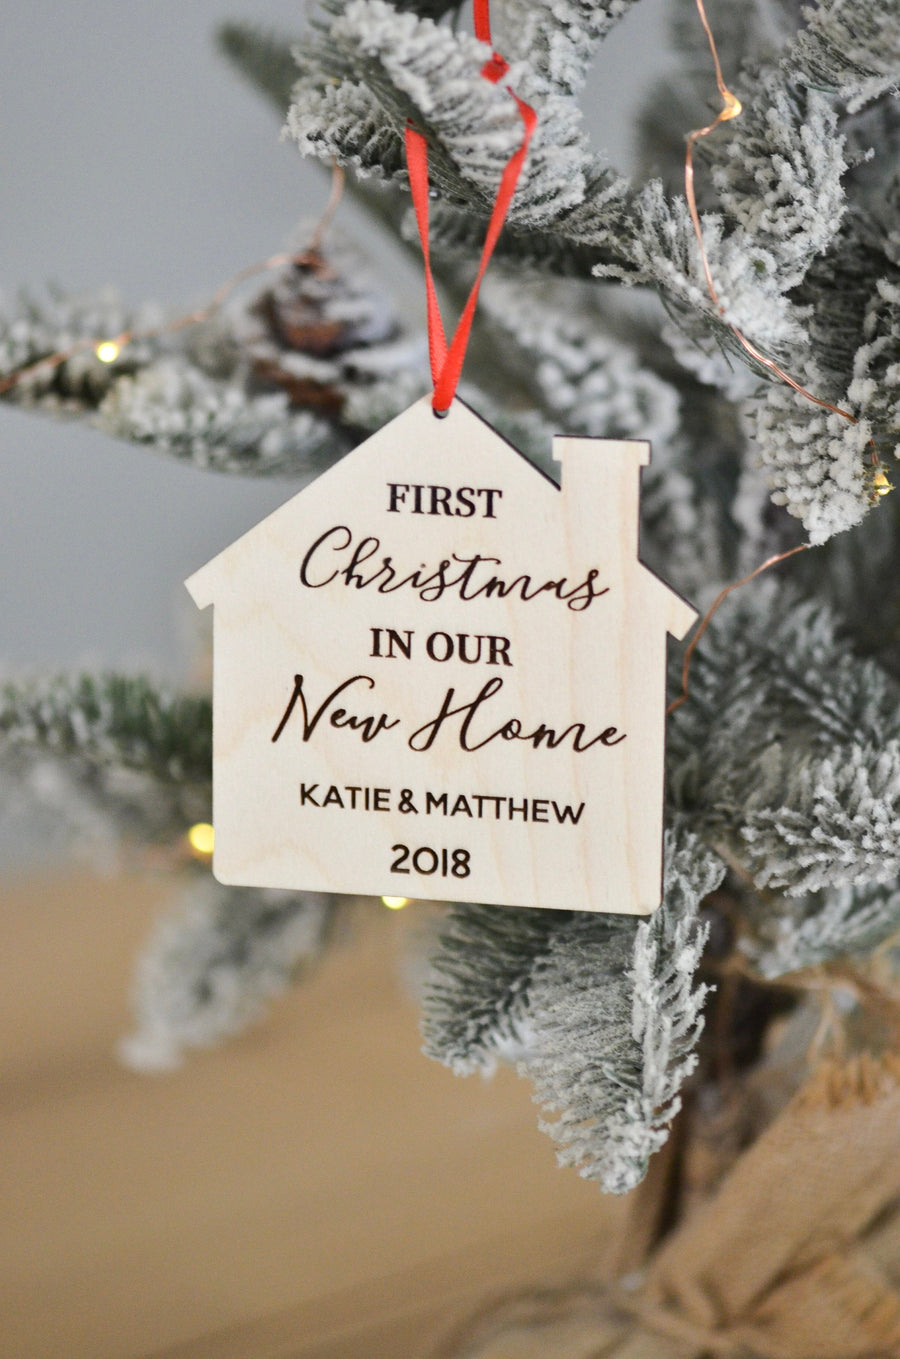 First Christmas in our New Home Personalized ornament